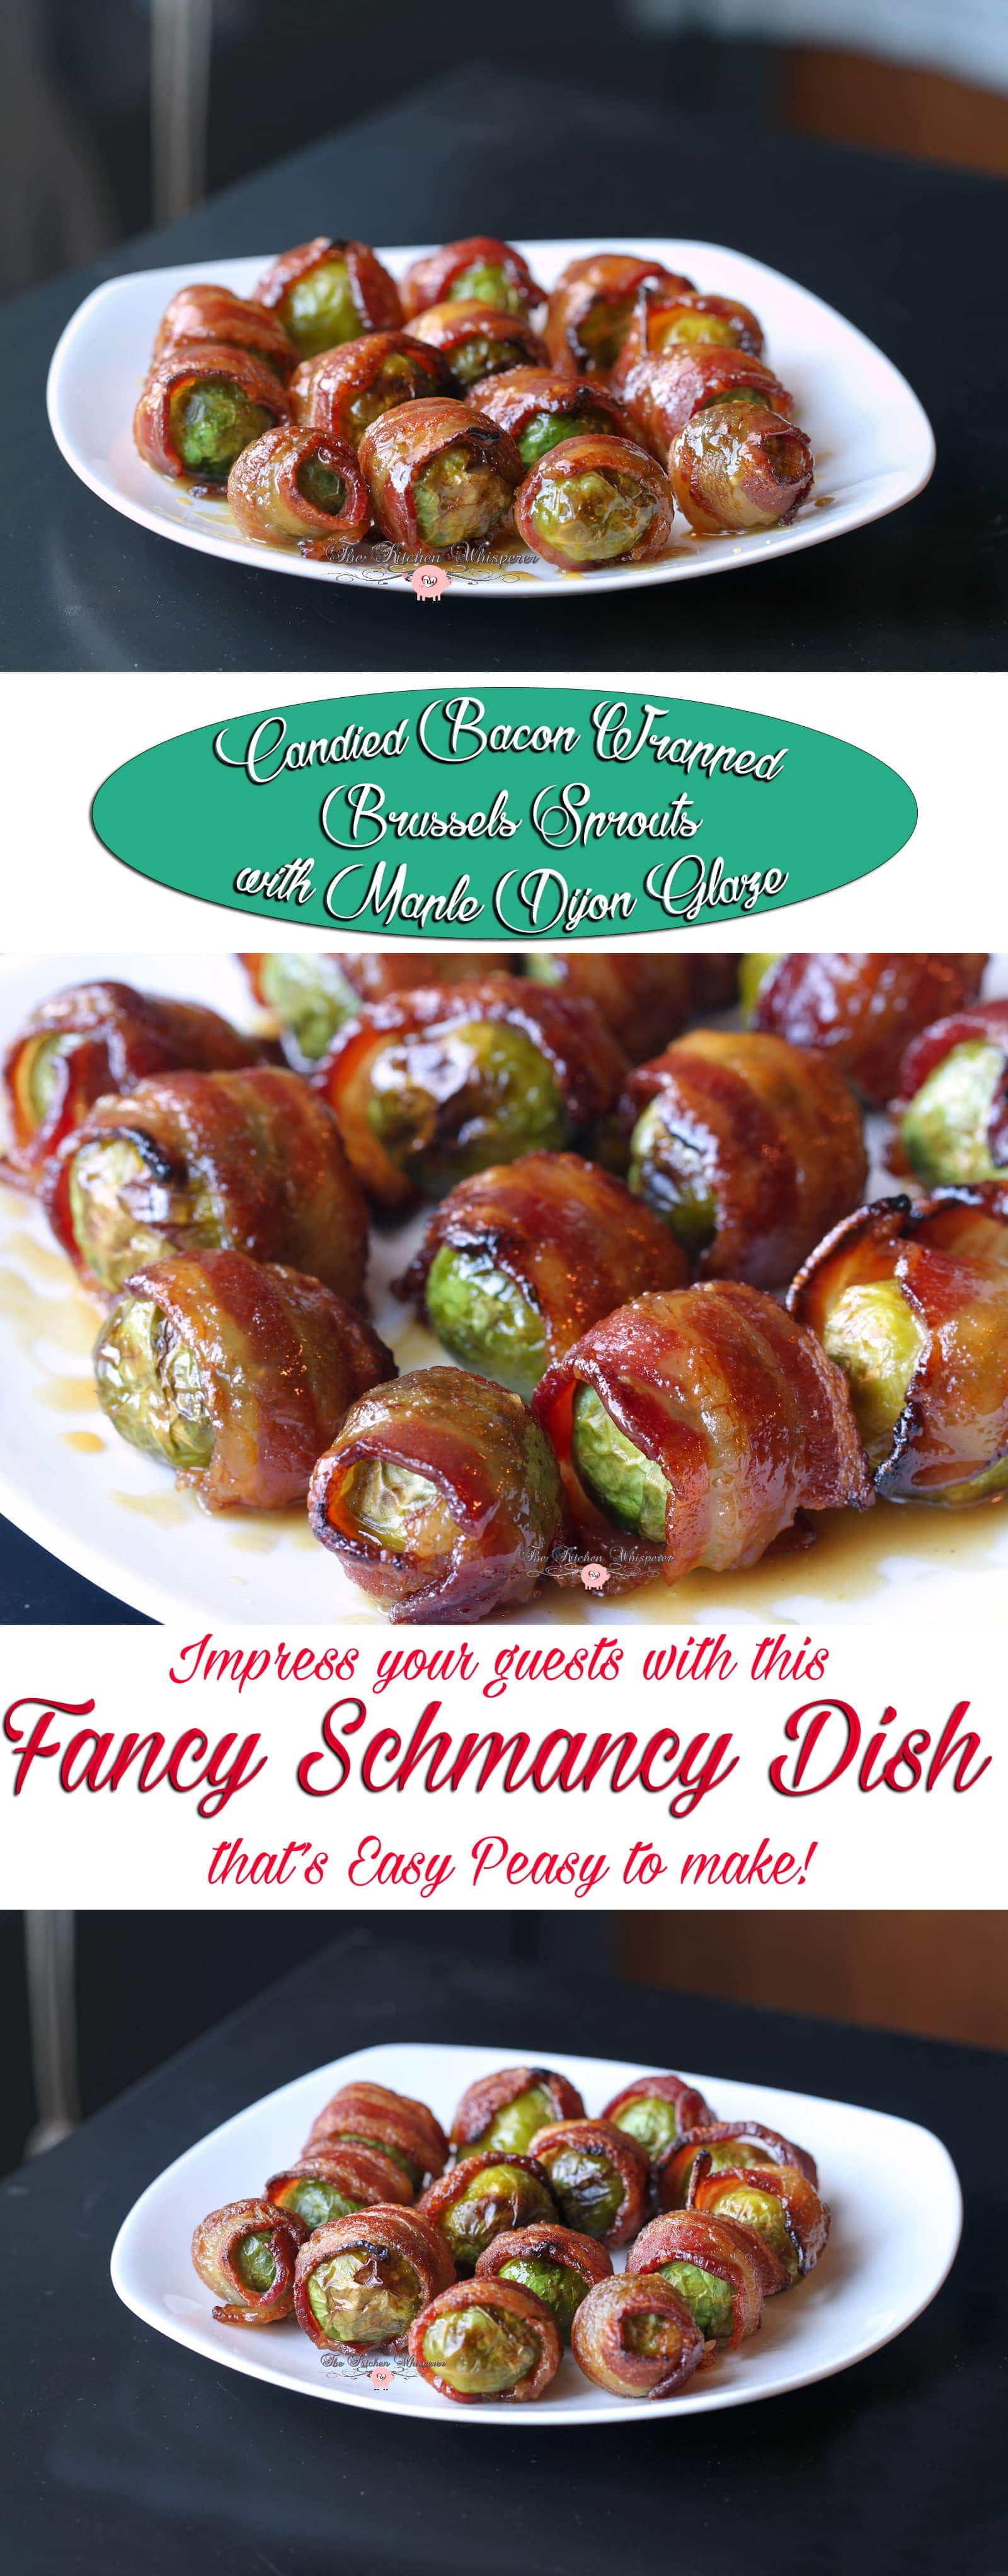 Candied Bacon Wrapped Brussels Maple Dijon collage